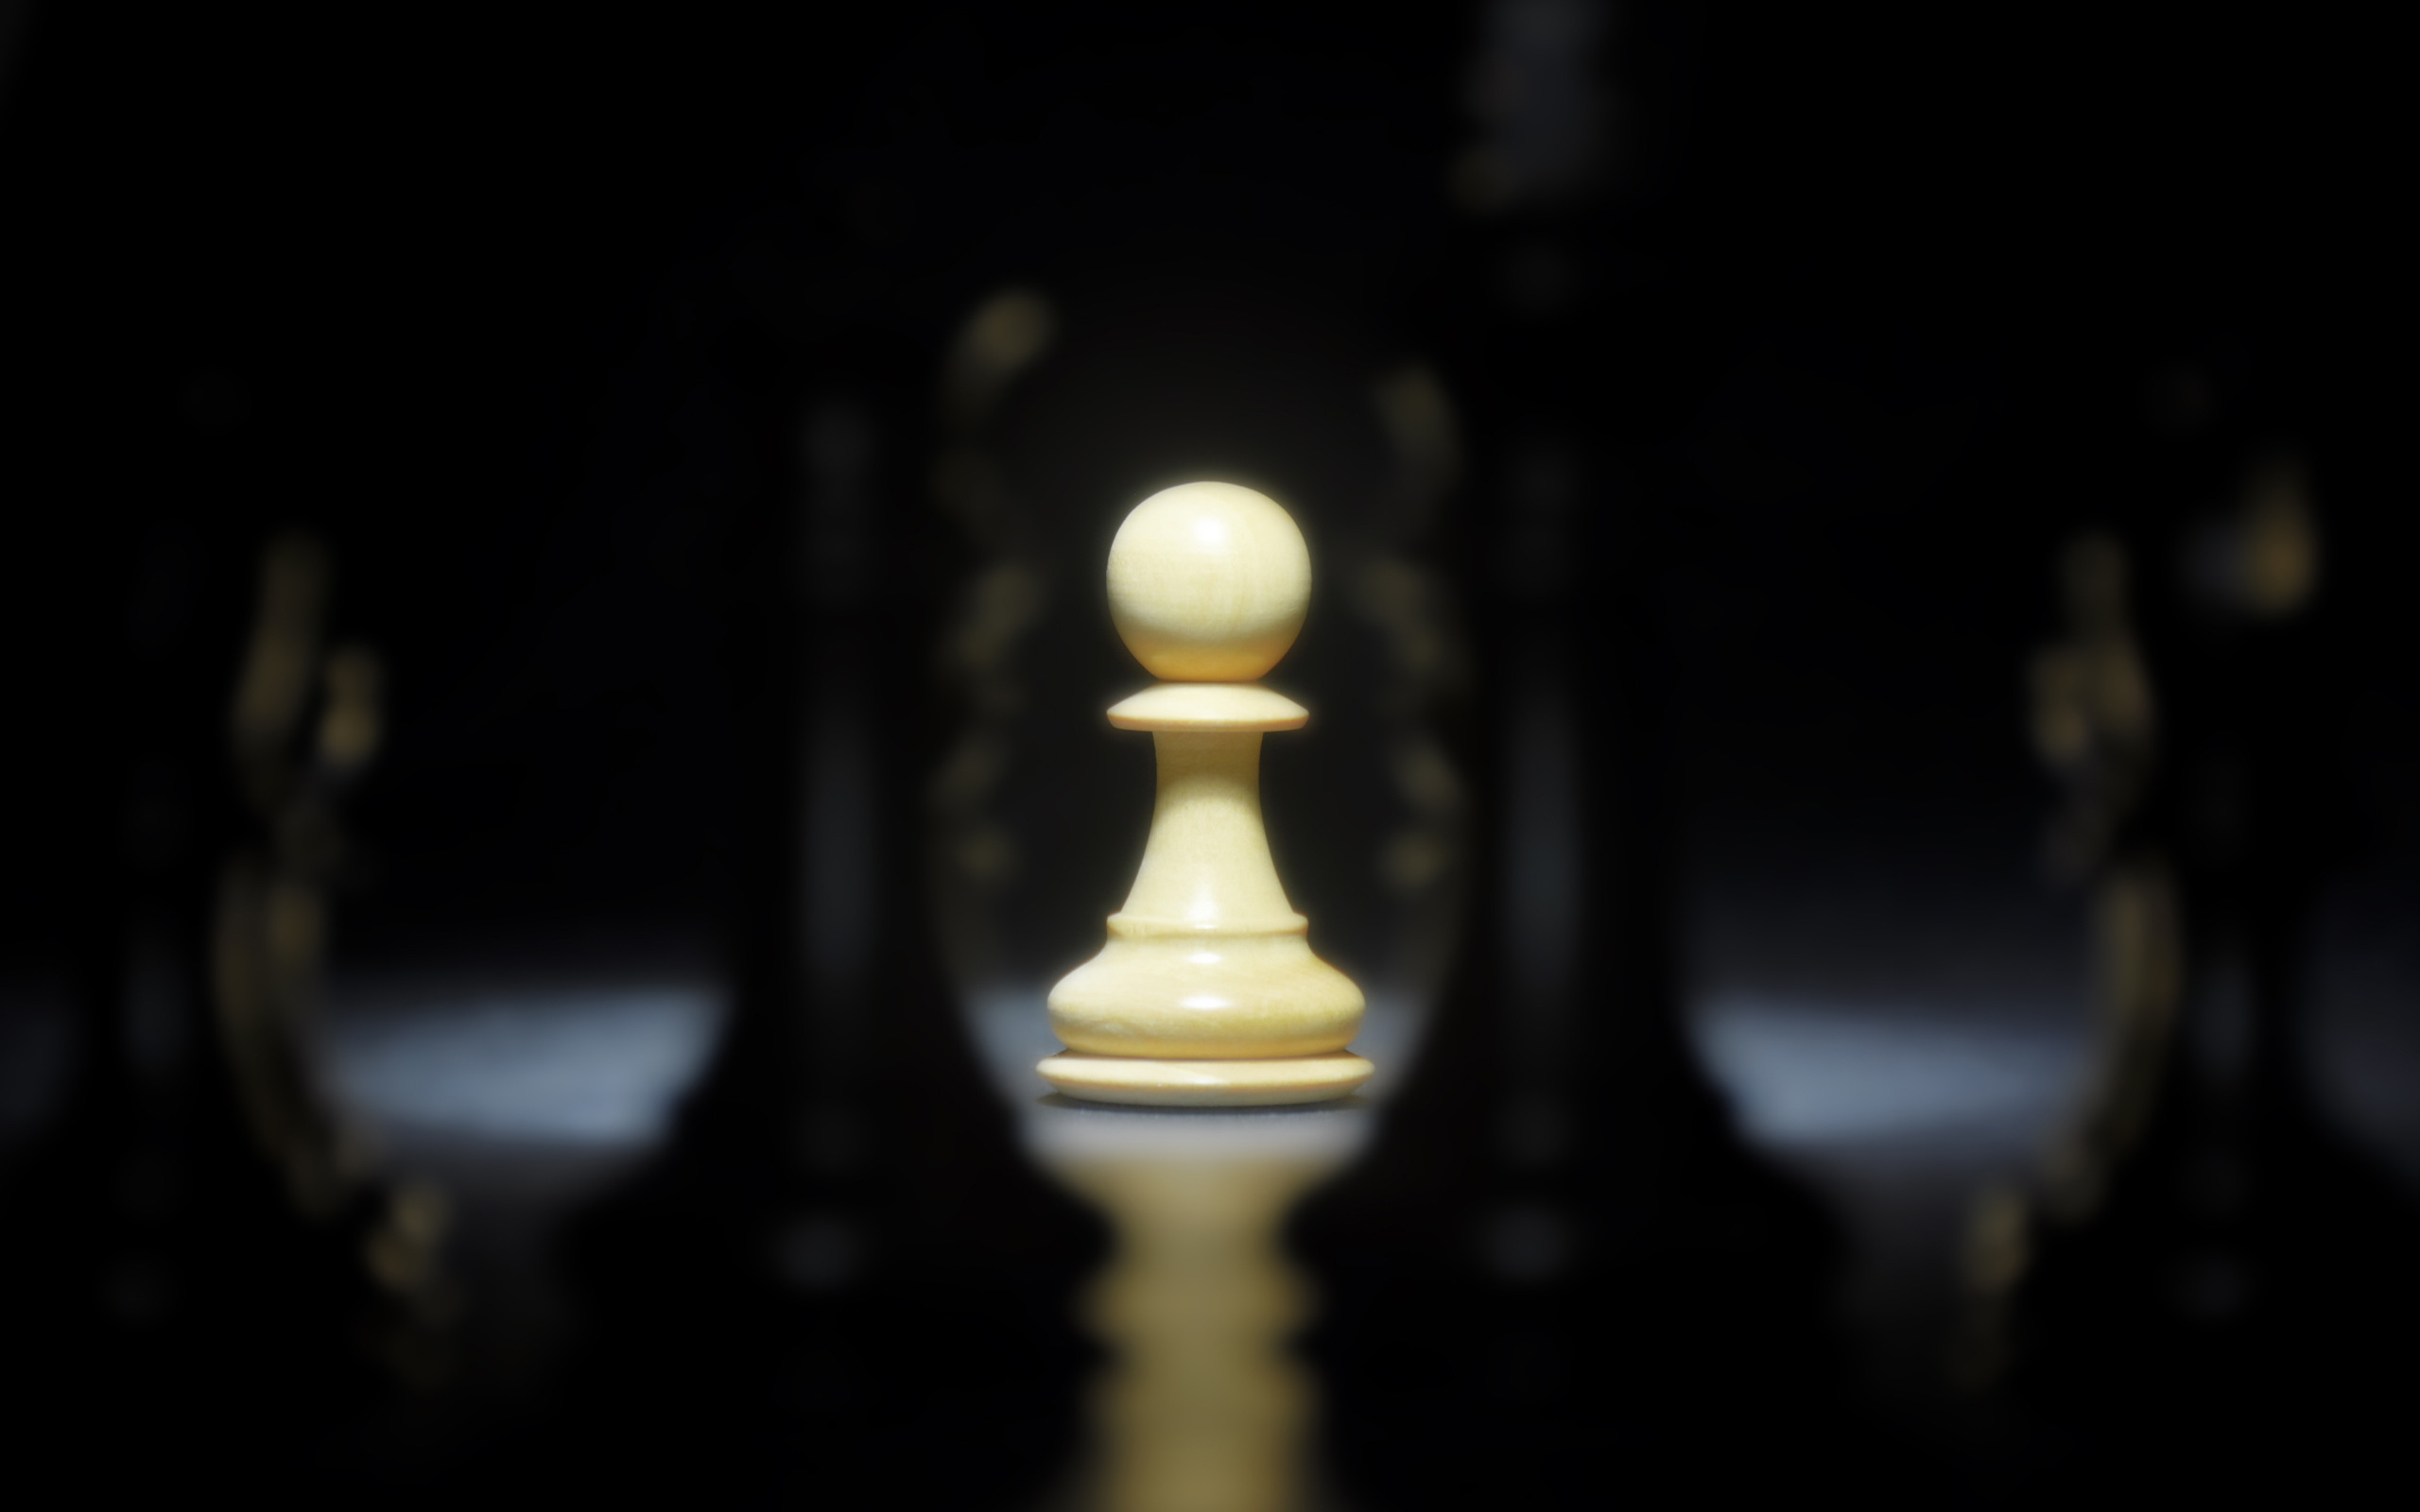 Chess full hd, hdtv, fhd, 1080p wallpapers hd, desktop backgrounds 1920x1080,  images and pictures